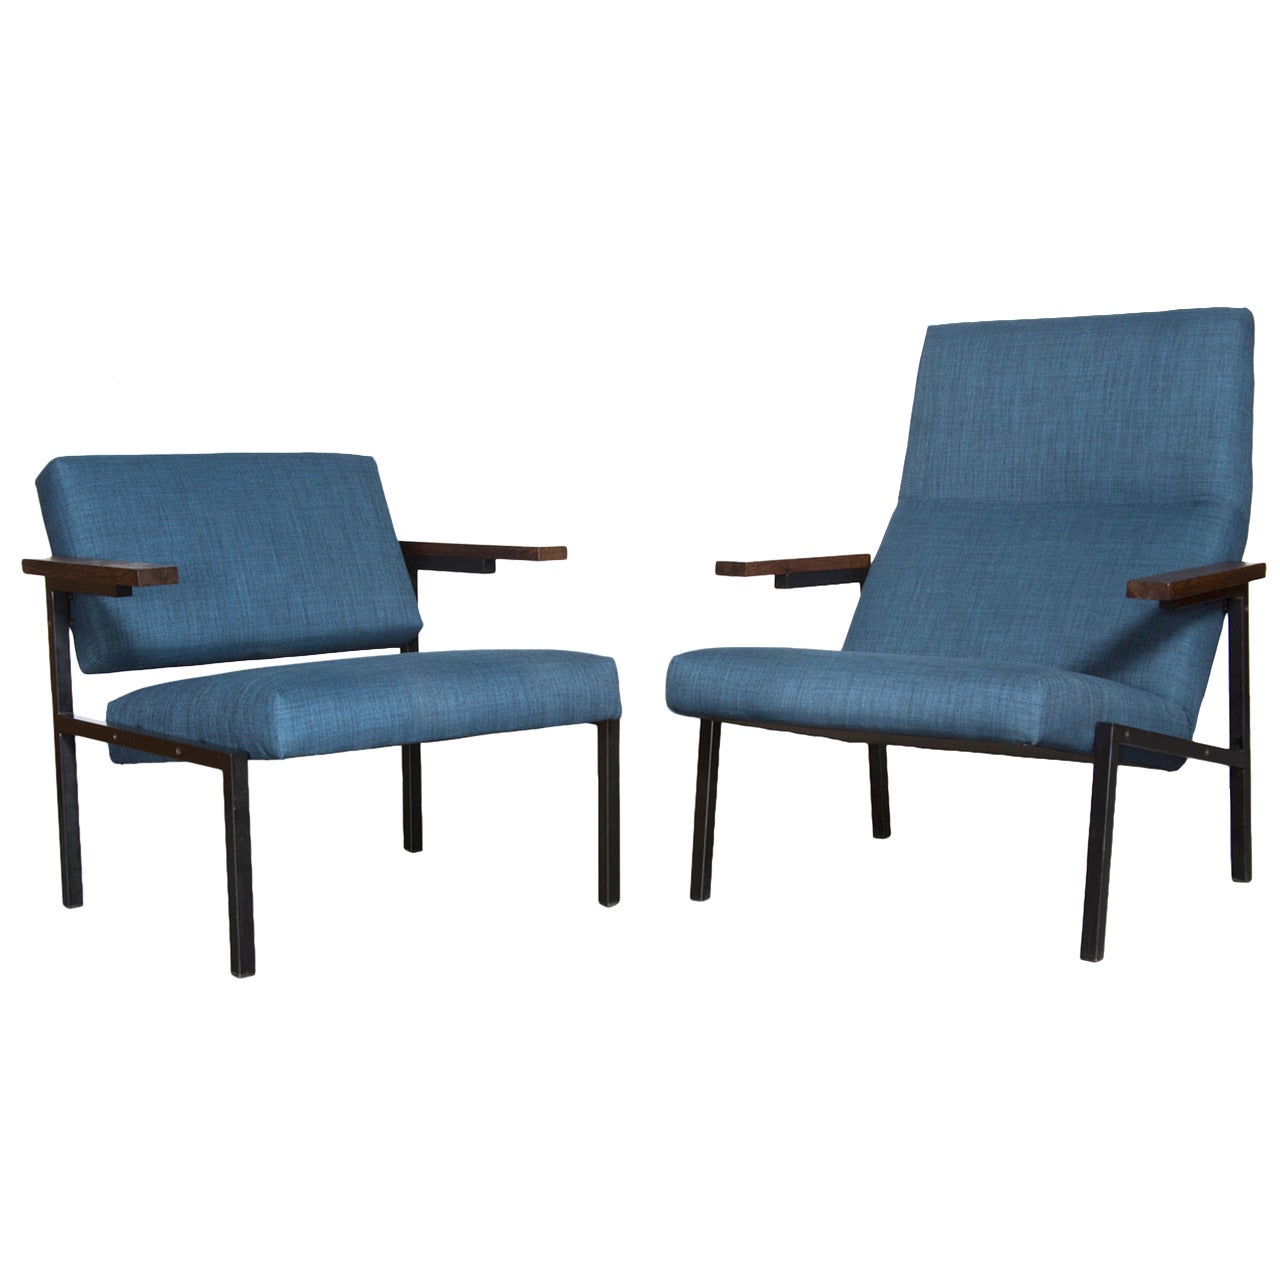 Martin Visser His and Hers Lounge Chairs for 't Spectrum